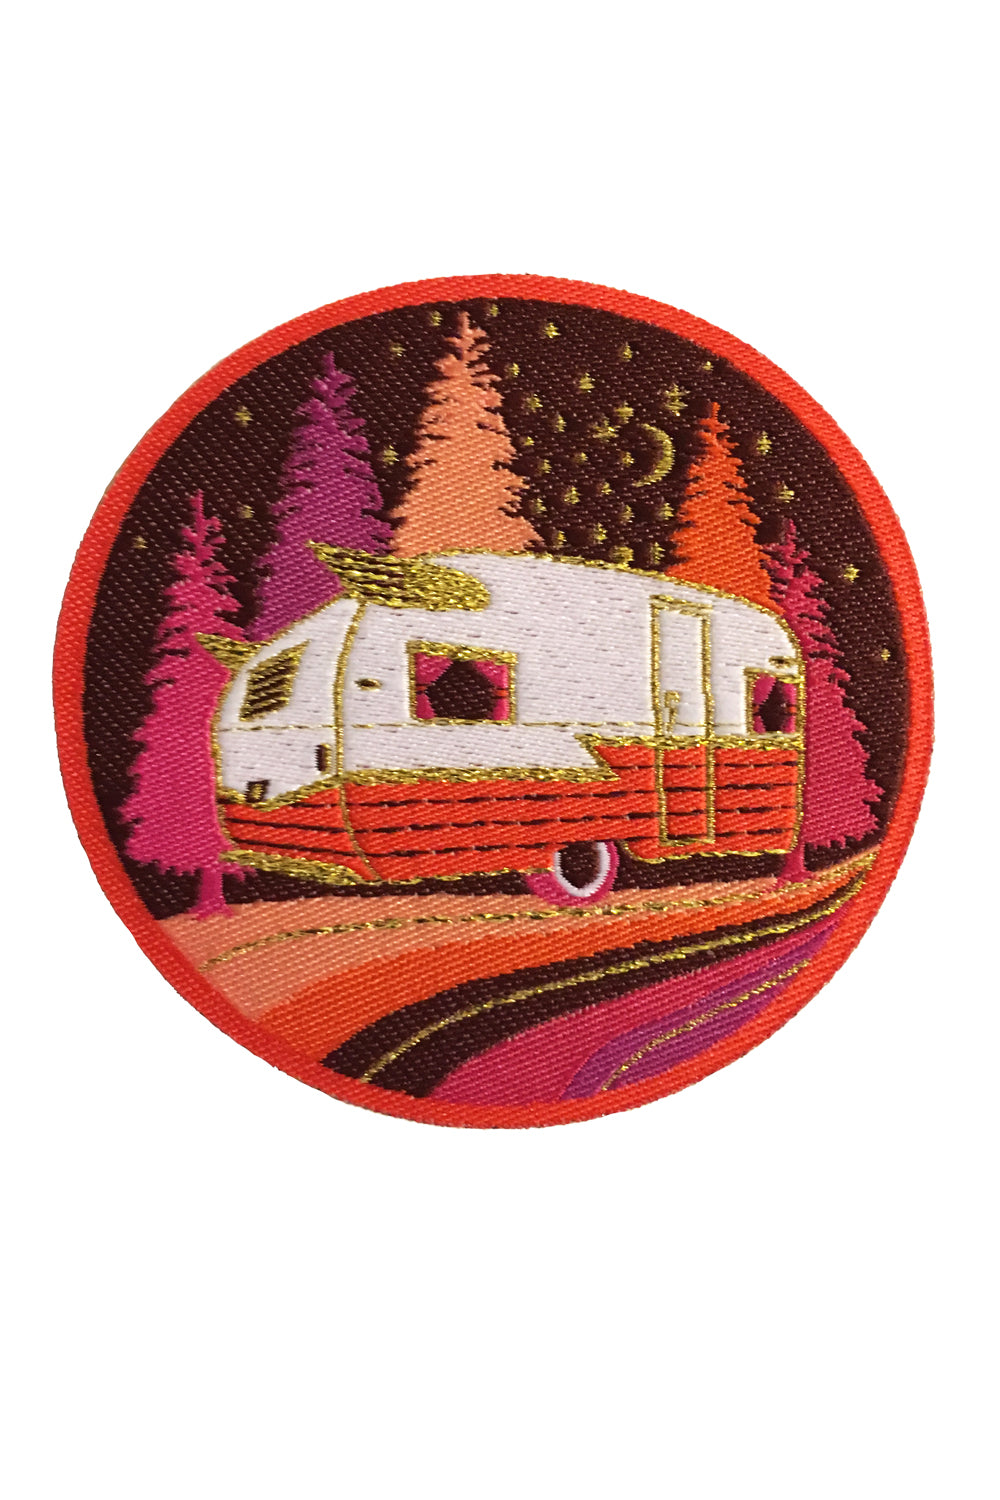 Bright red, orange, pink and gold woven patch with vintage camper